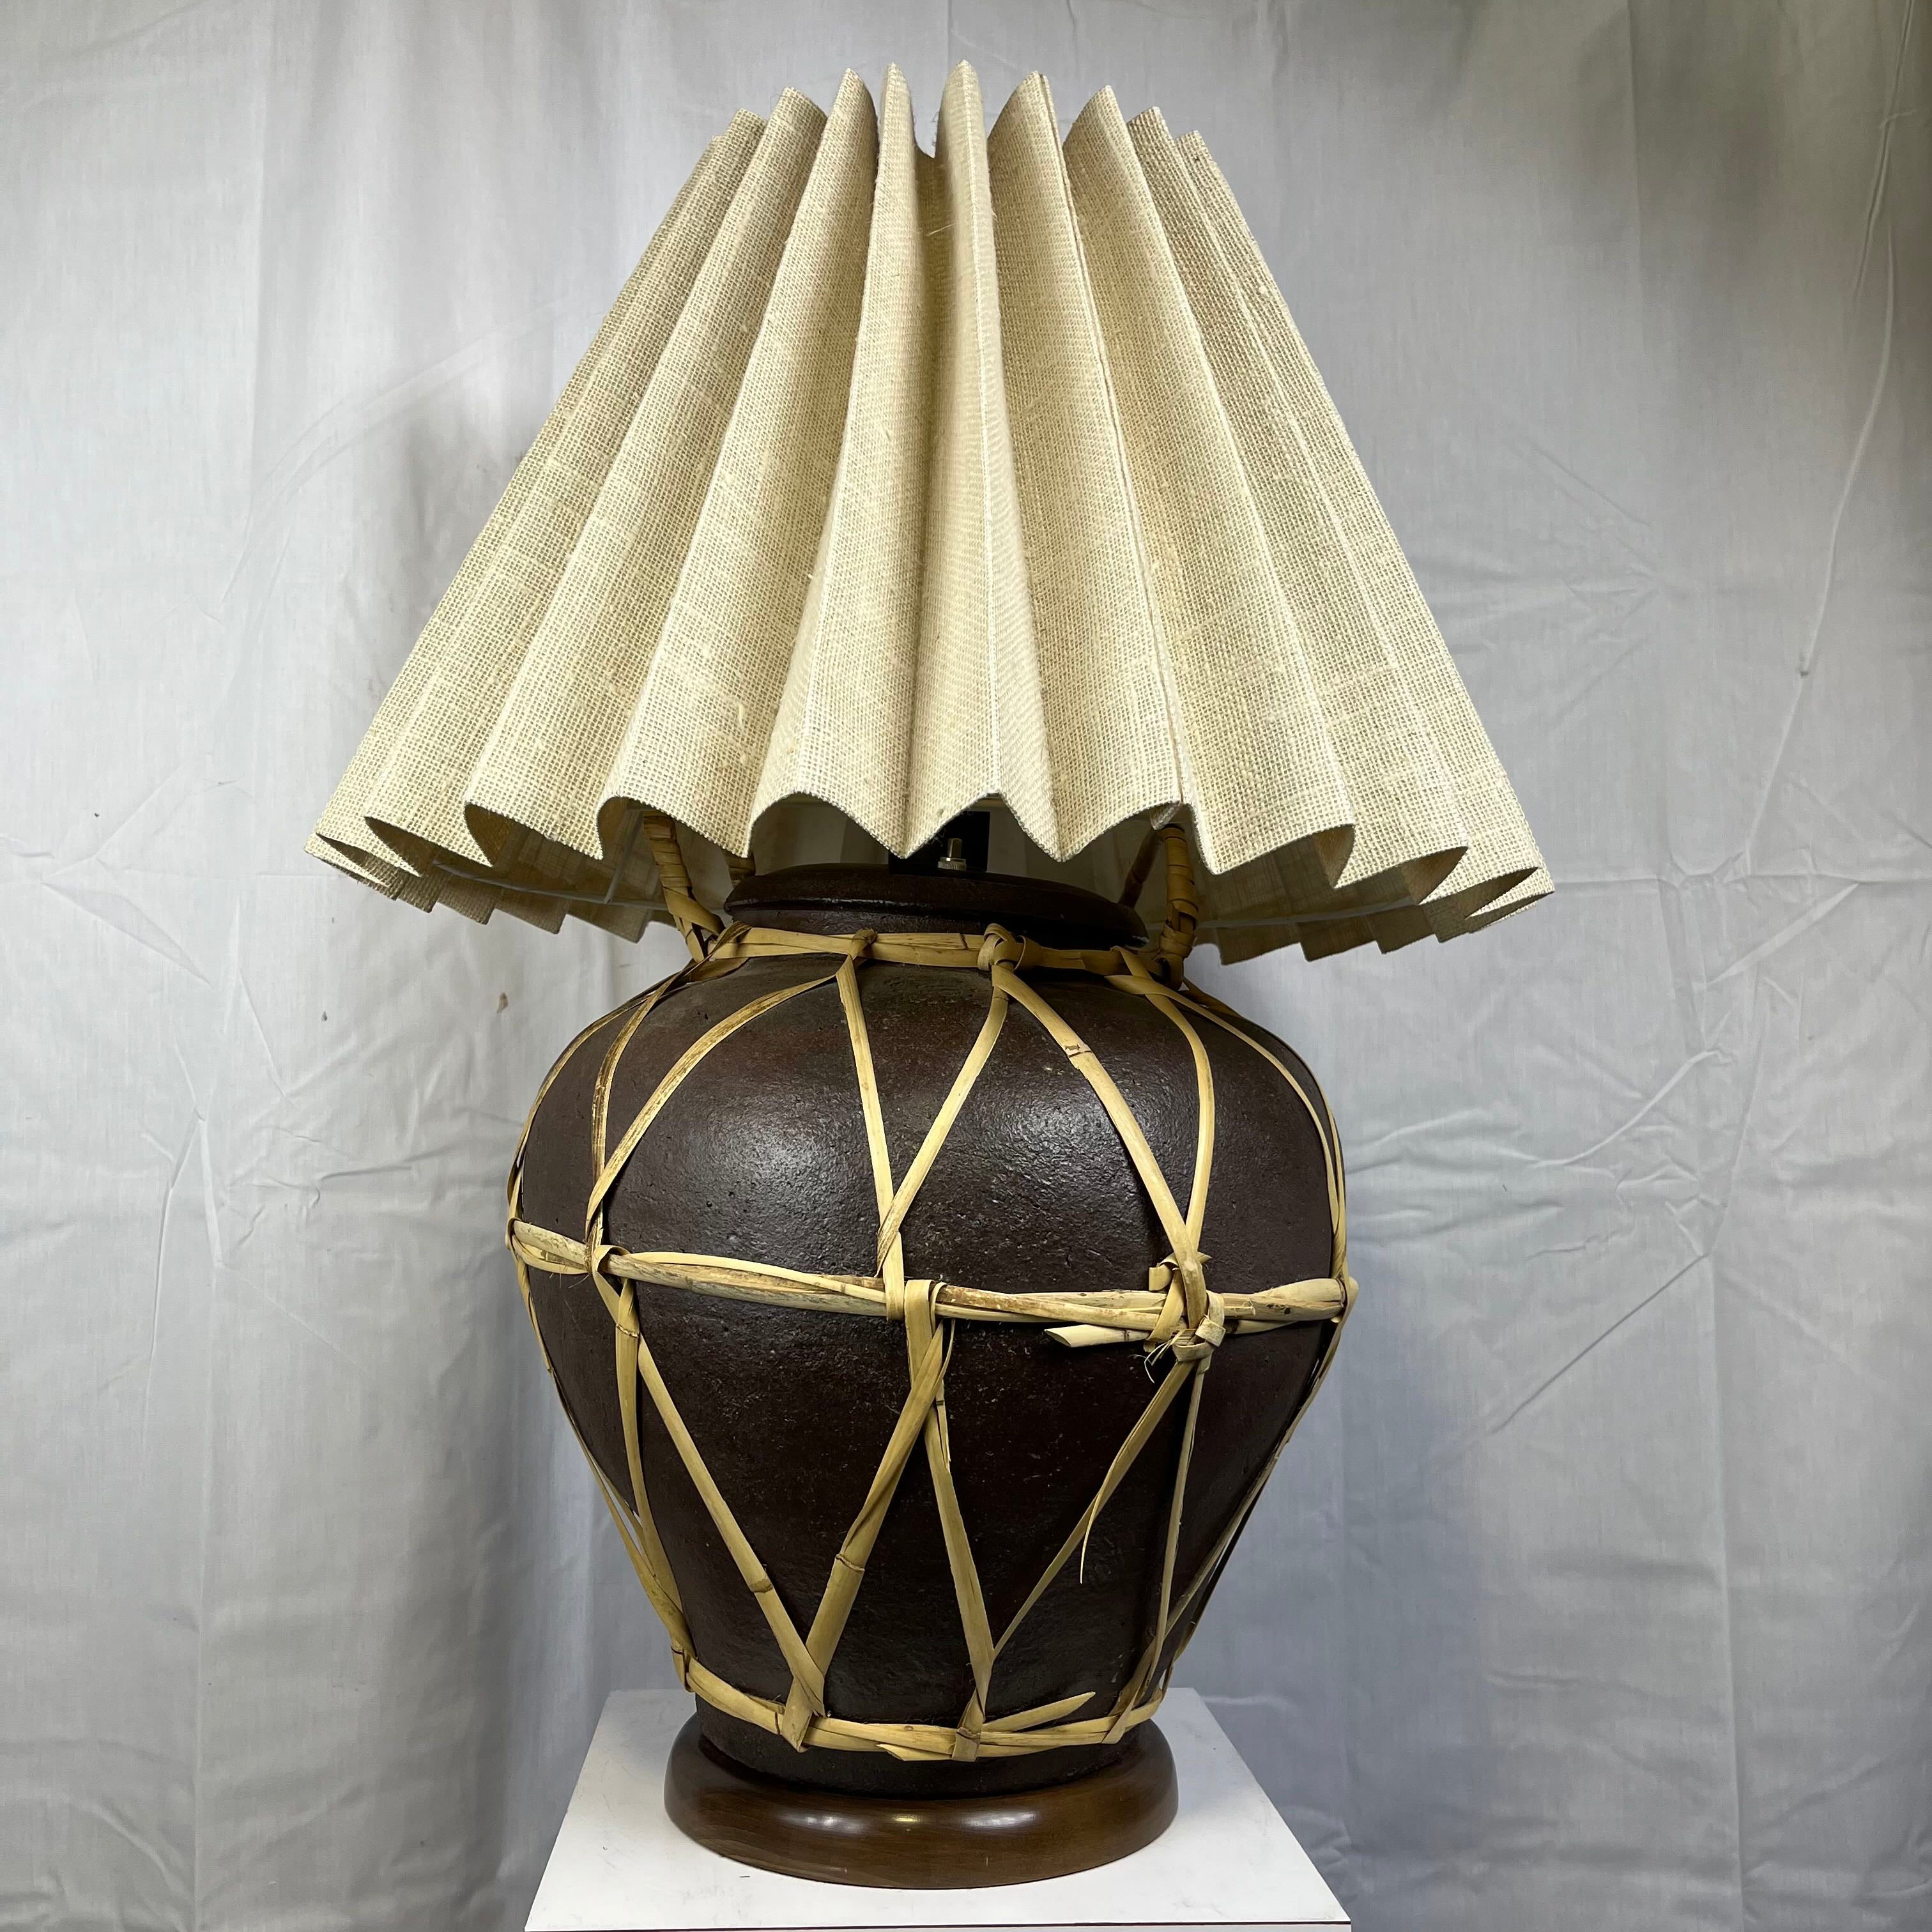 22" Diameter x 29.5" Ceramic with Criss Cross Dried Grass Design on Wood Base 2 Light Table Lamp